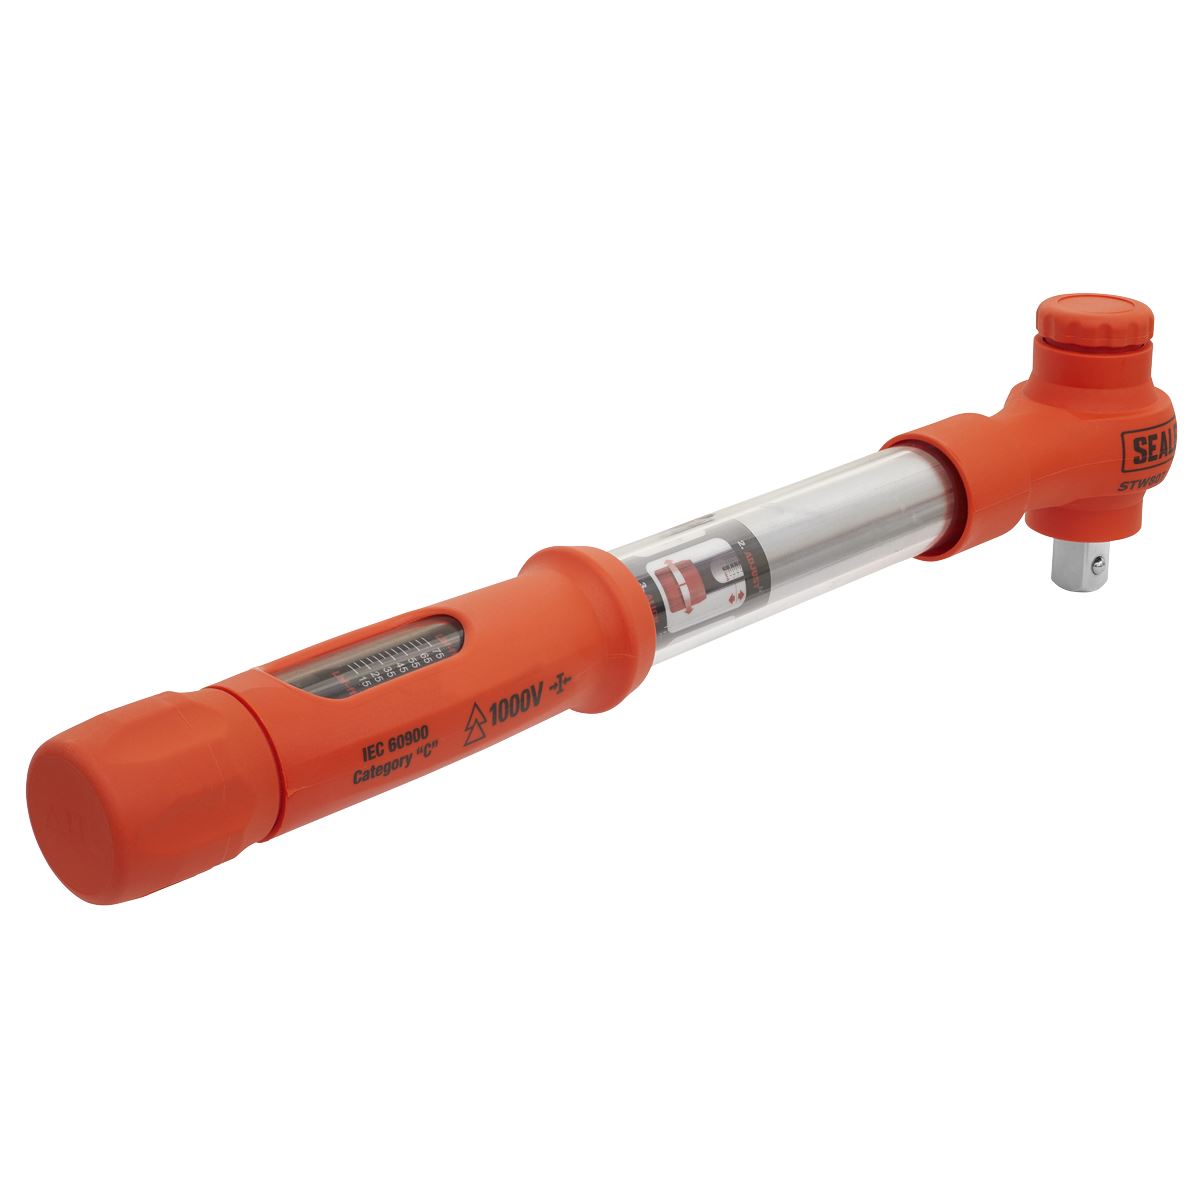 Sealey Premier Torque Wrench Insulated 1/2"Sq Drive 20-100Nm